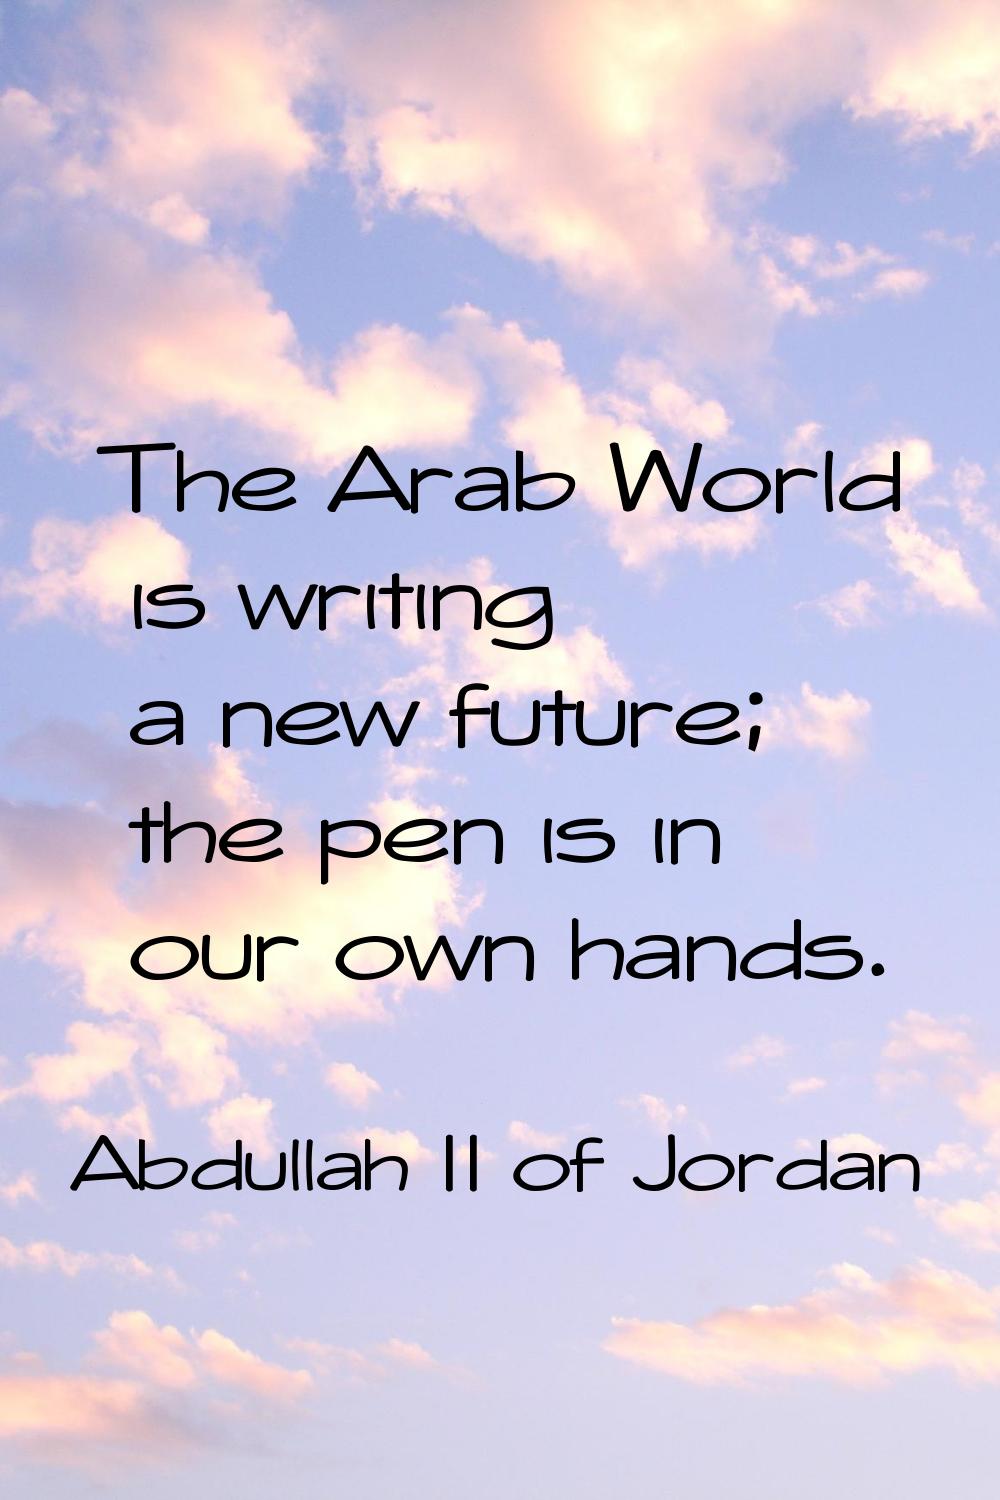 The Arab World is writing a new future; the pen is in our own hands.